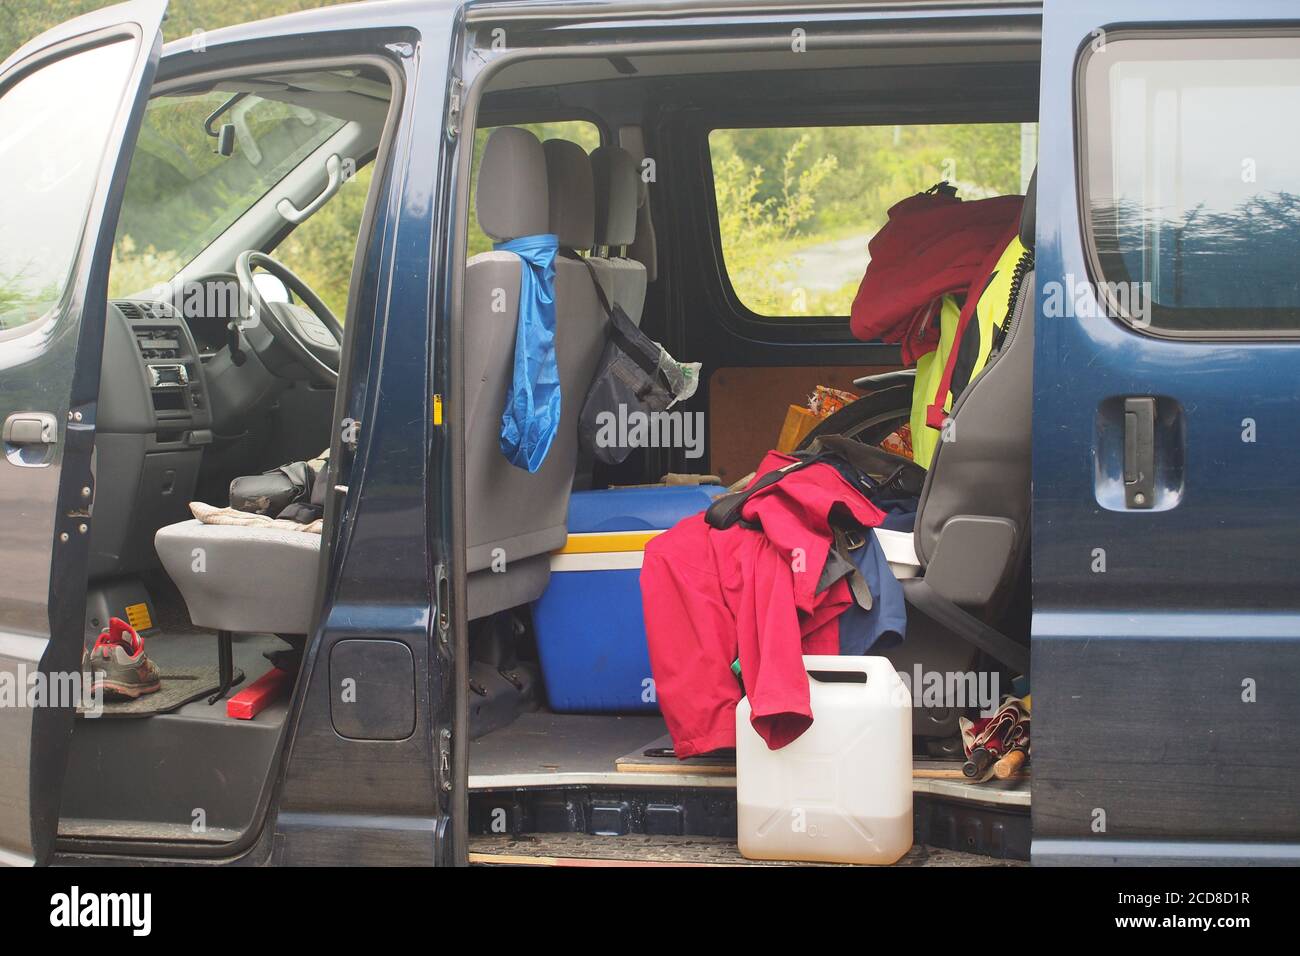 Looking into the open door of a mini van filled with holiday, staycation, items including water container, cool box,coats, shoes and umbrellas Stock Photo